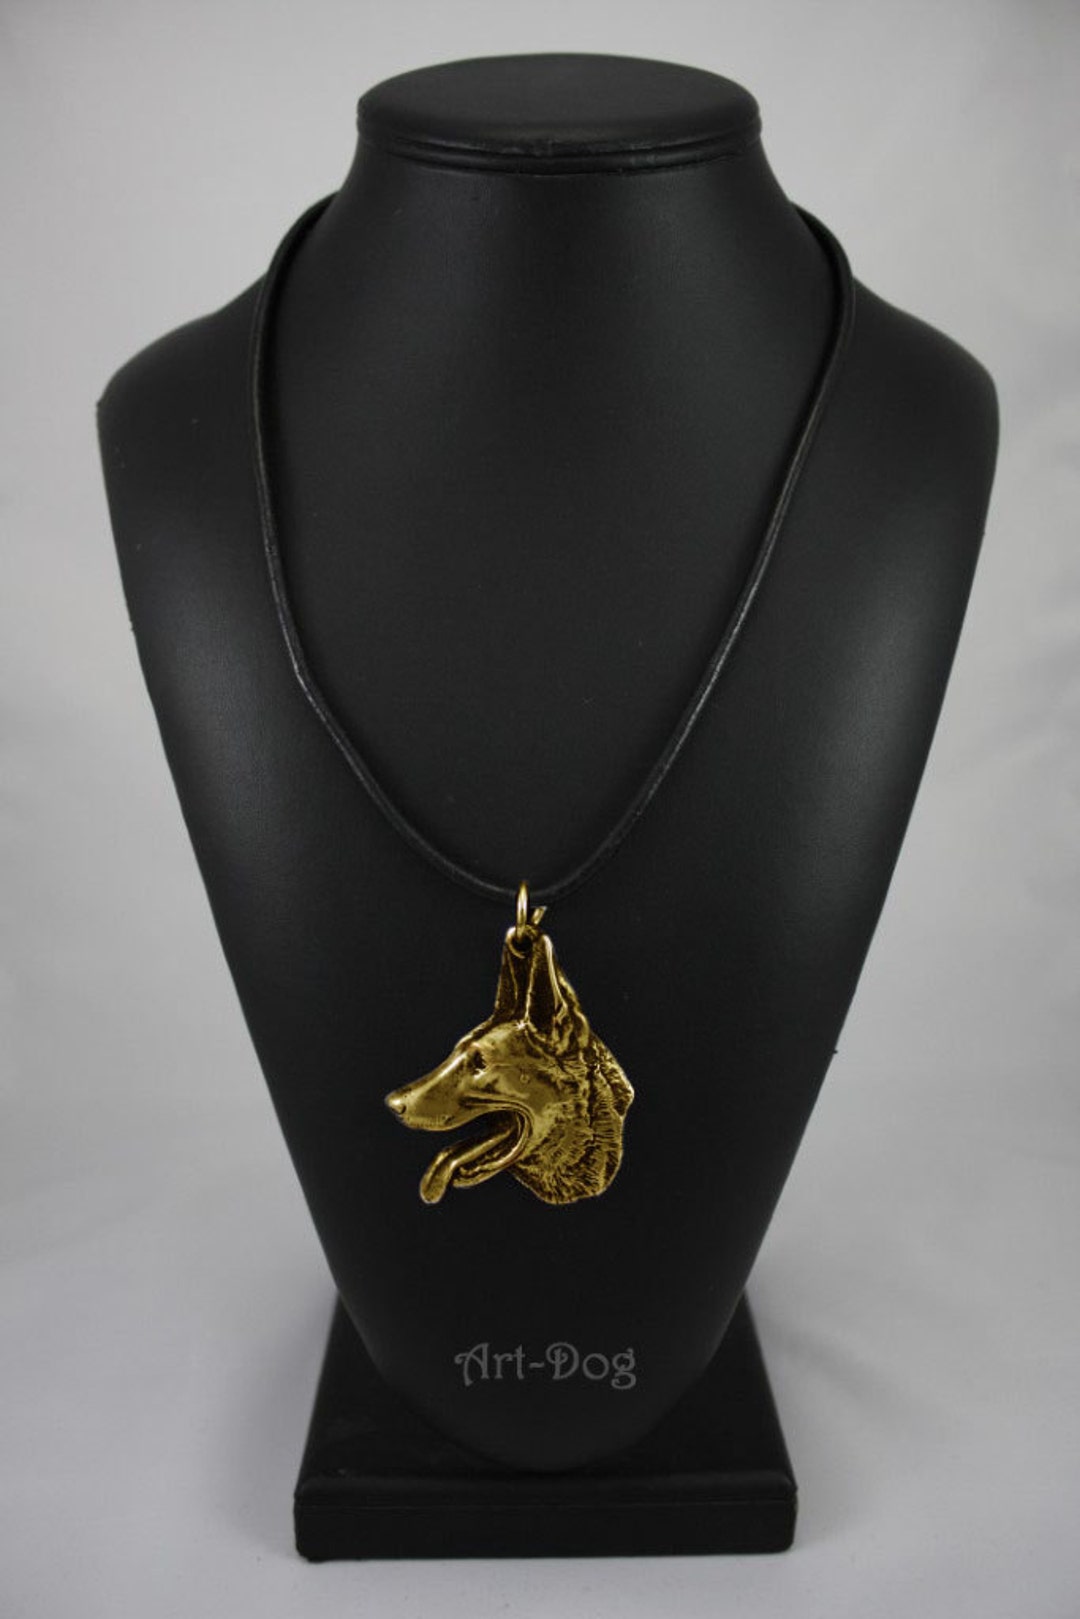 Malinois Millesimal Fineness 999 Dog Necklace Limited - Etsy